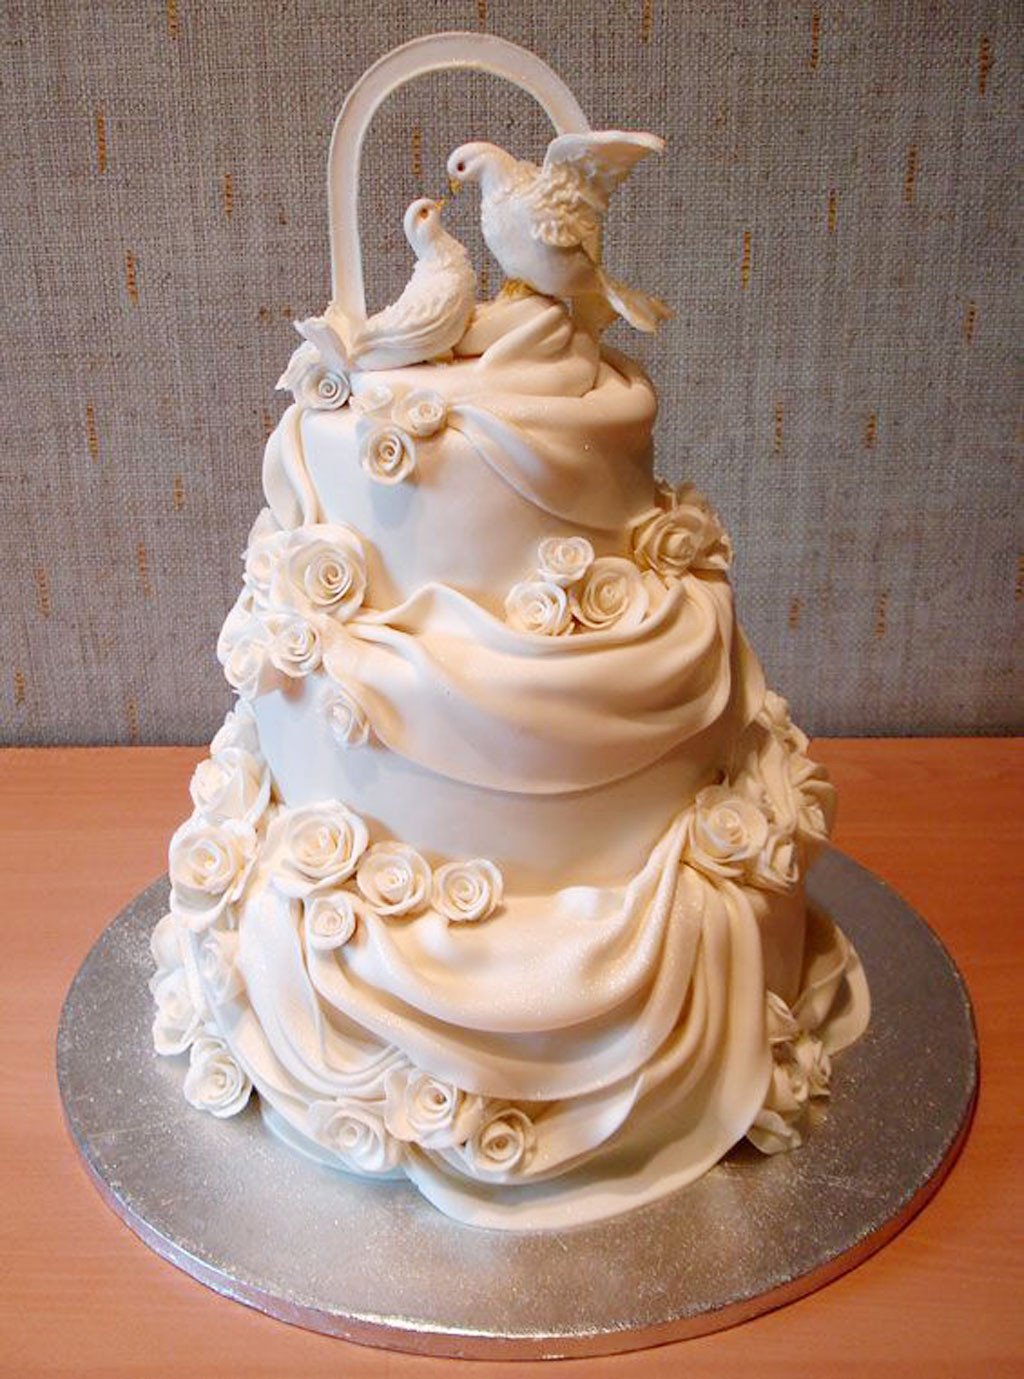 Beautiful Wedding Cakes Pictures
 Beautiful Wedding Cakes Toppers Wedding Cake Cake Ideas